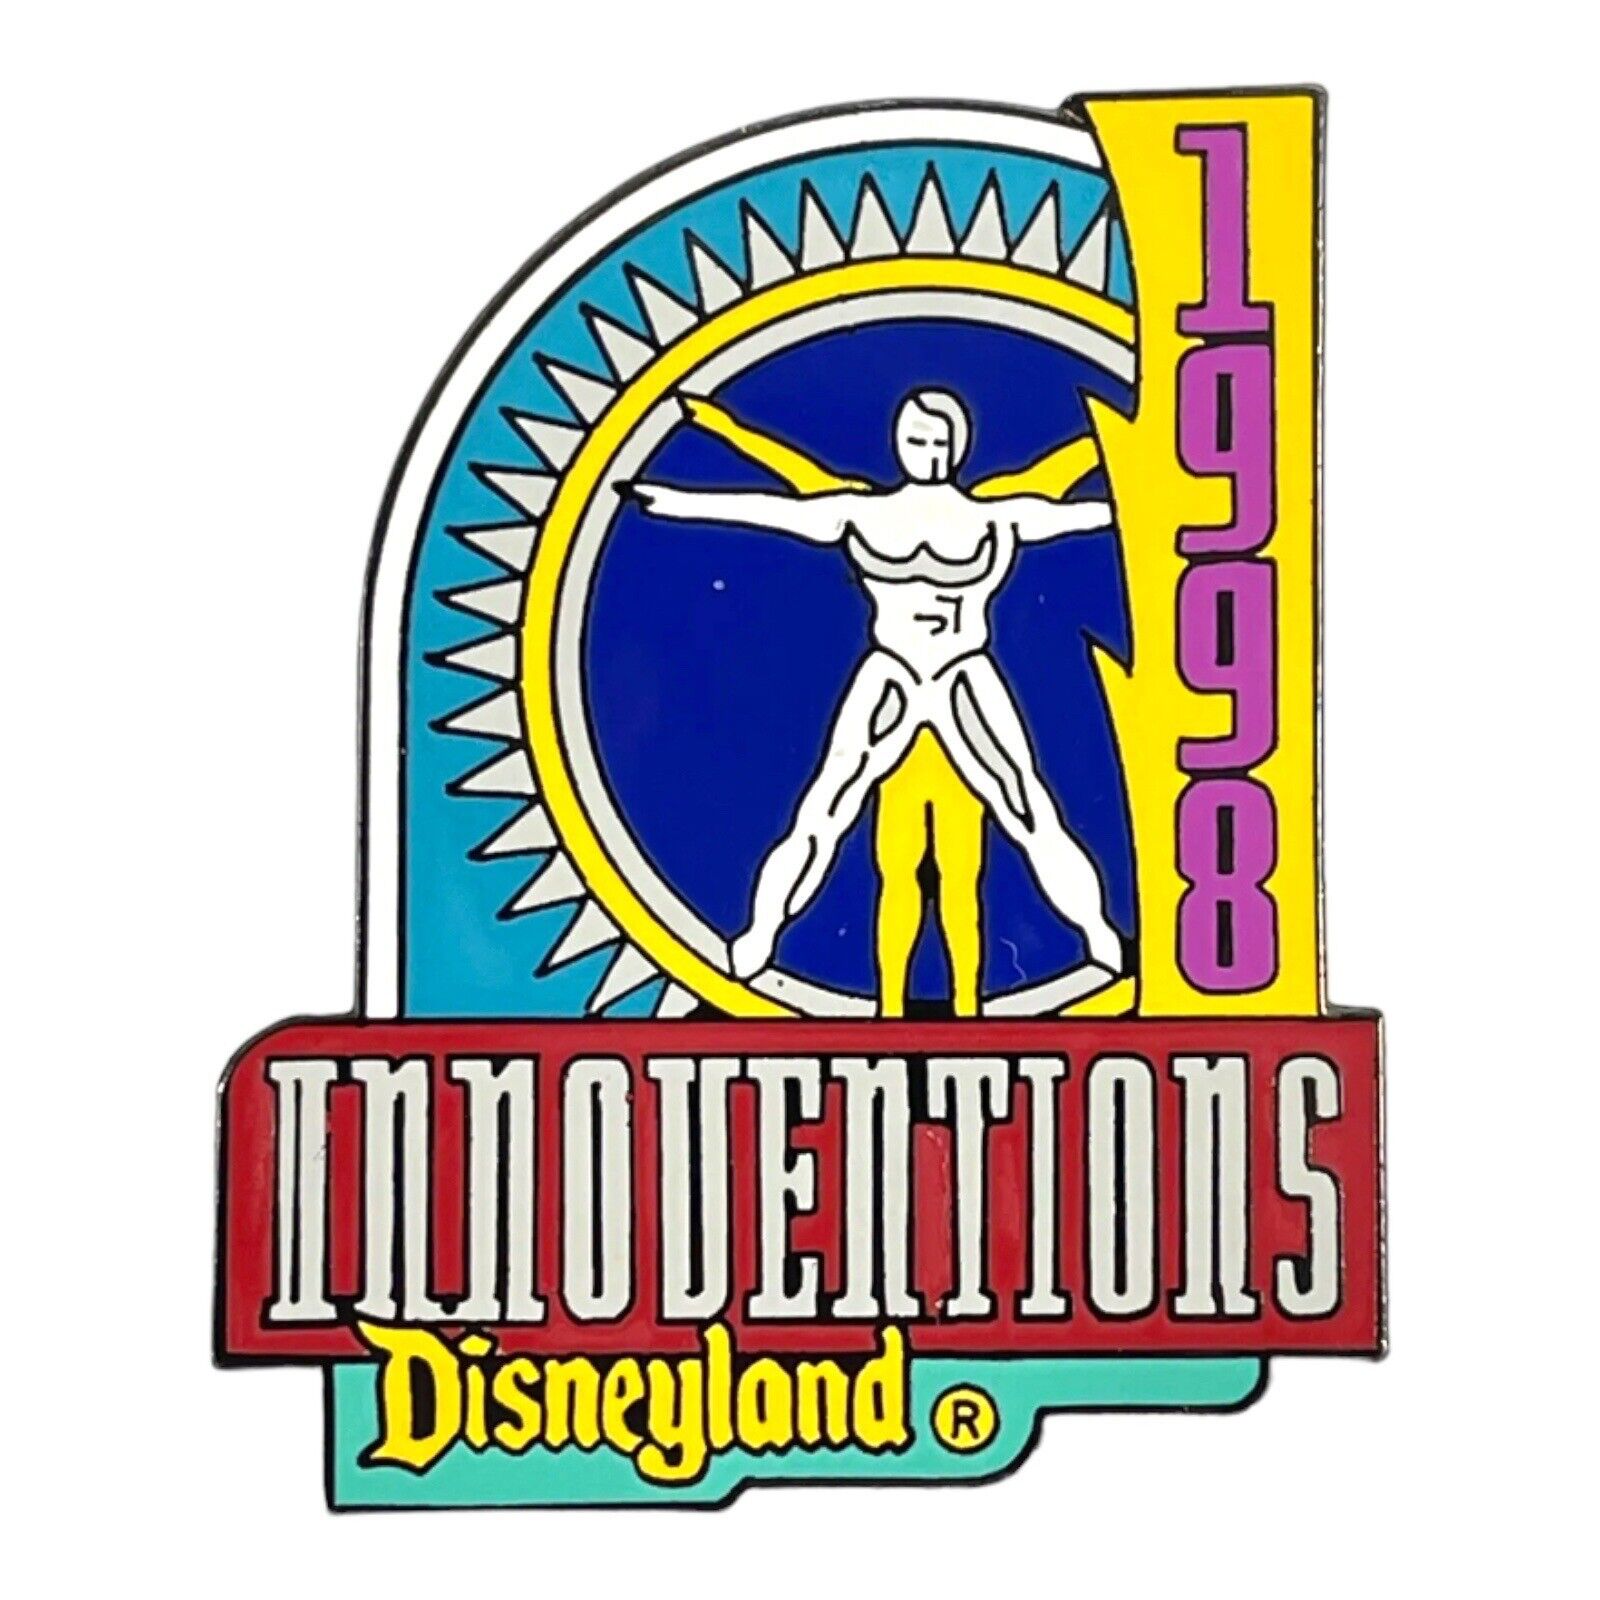 Disneyland Park Tomorrowland 1998 Innoventions Discontinued Attraction Pin